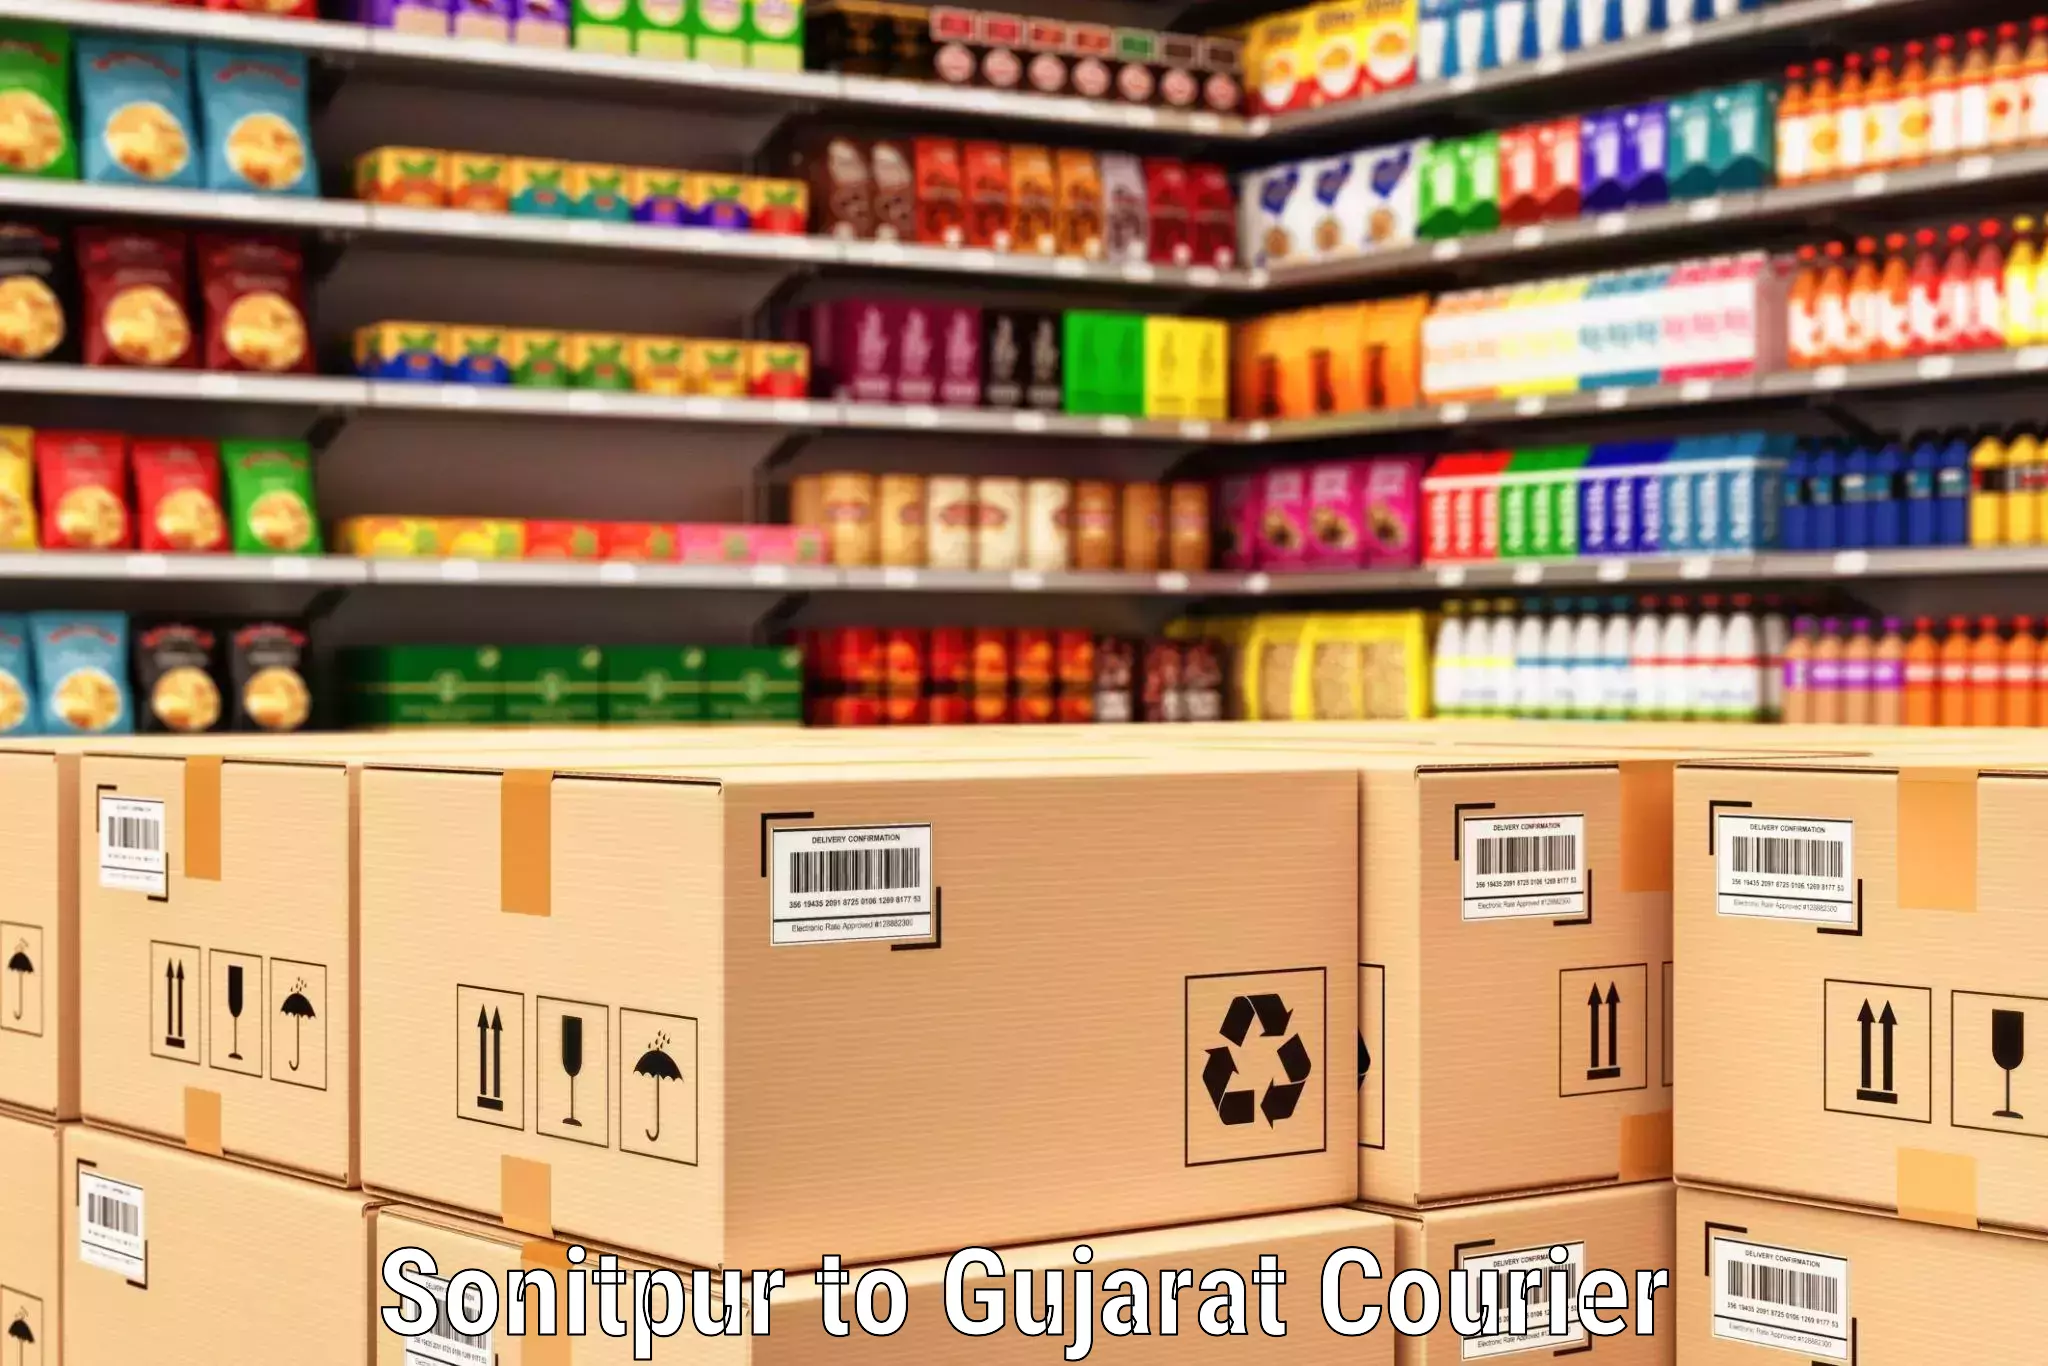 Courier service innovation Sonitpur to Gujarat